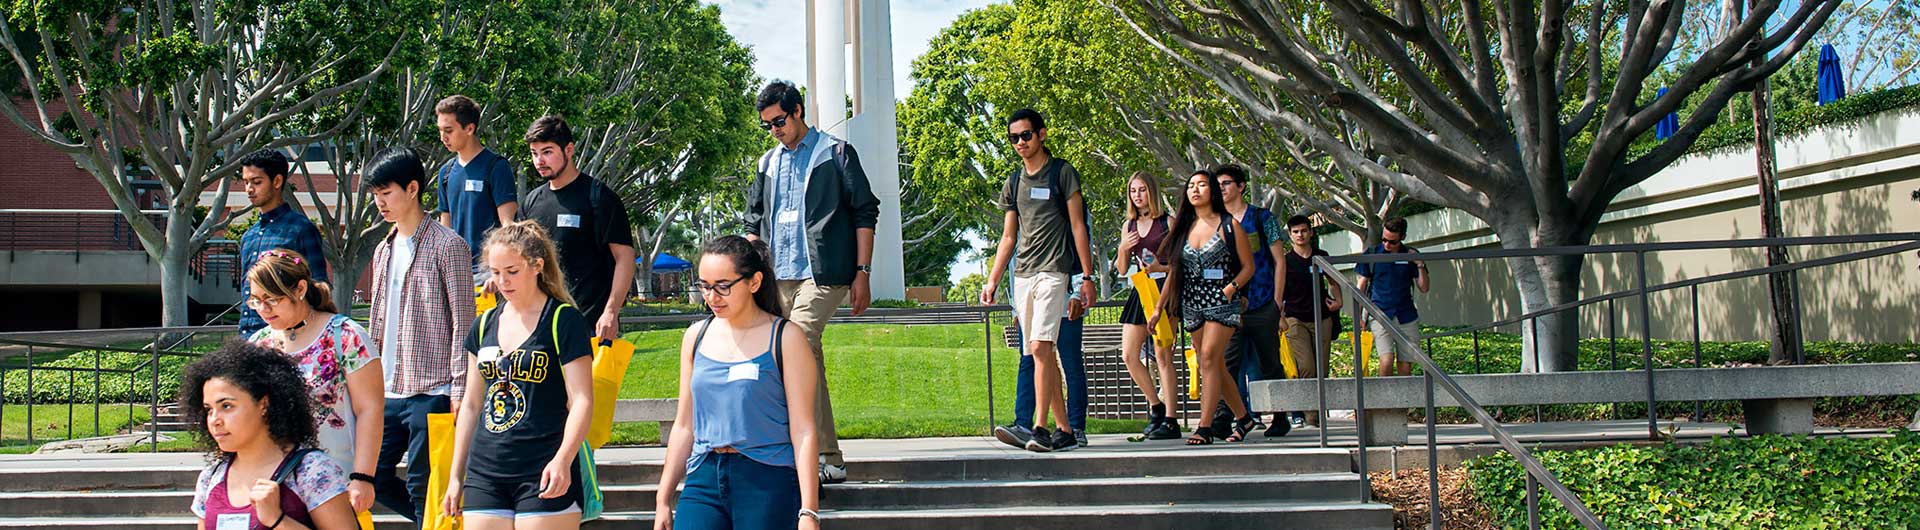 Transfer Admission Eligibility | California State University, Long Beach